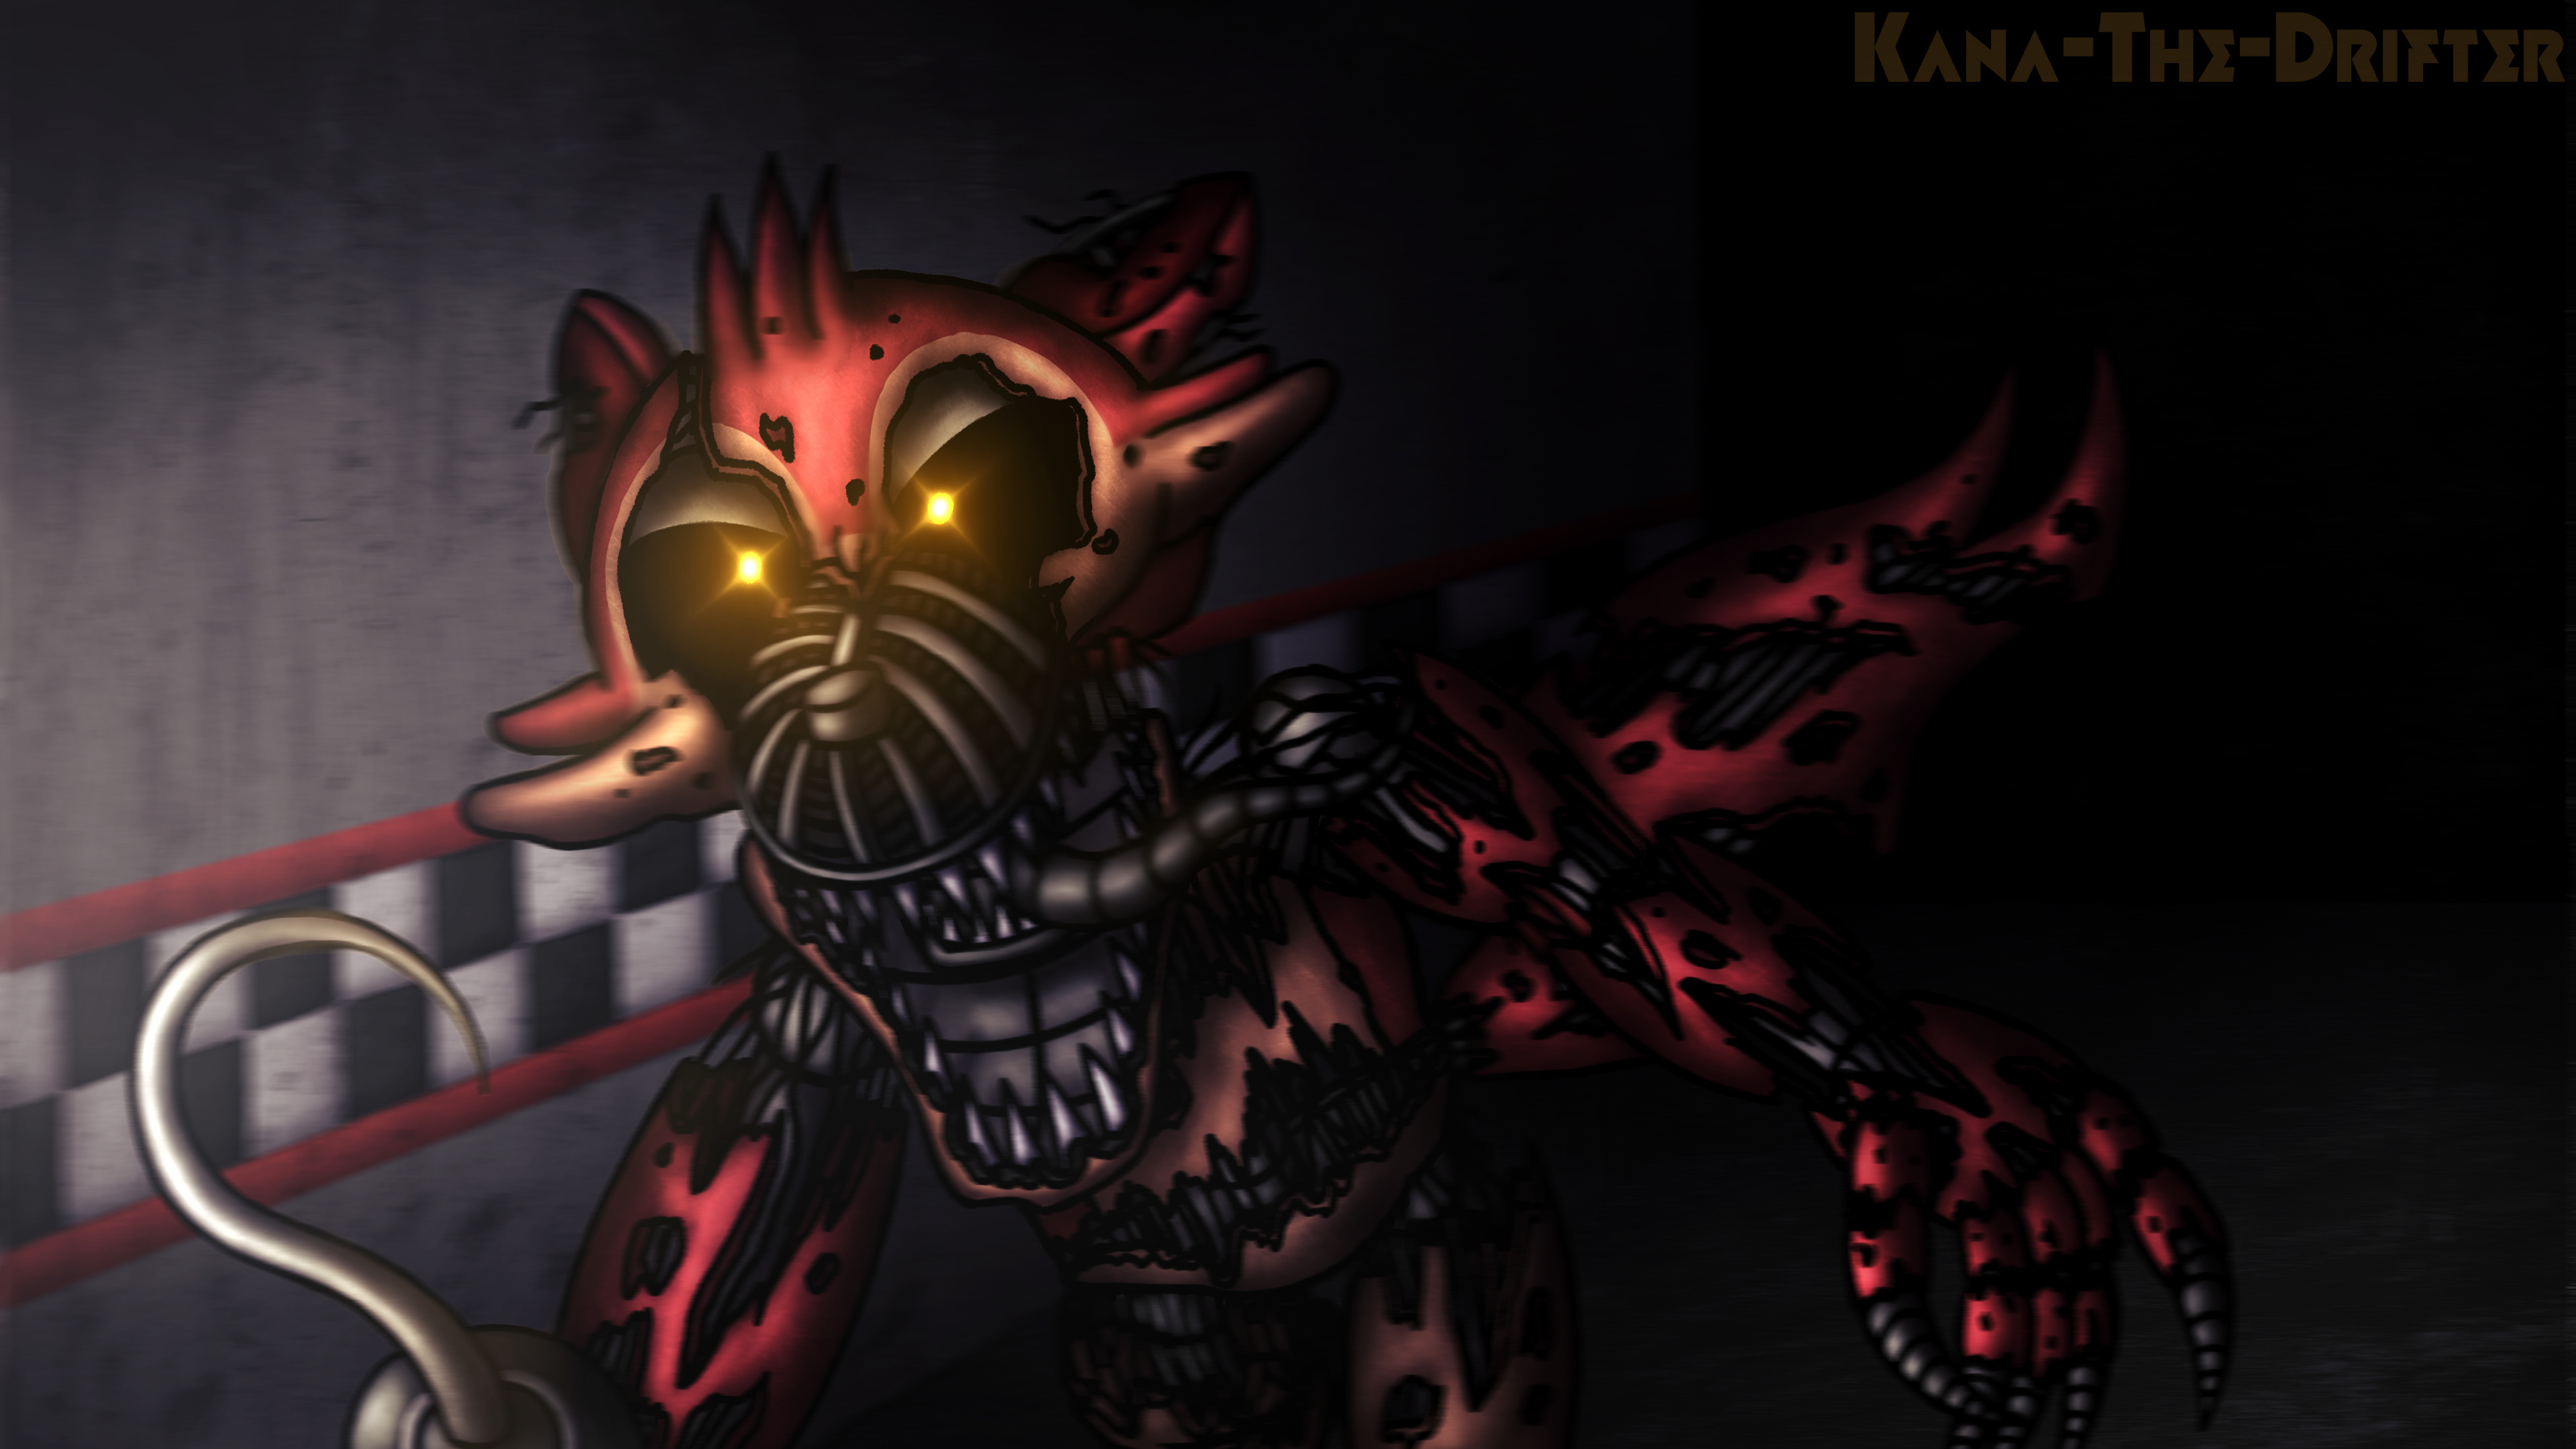 3840x2160 ... Don't Even Try To Escape (4K FnaF Wallpaper) by Kana-The